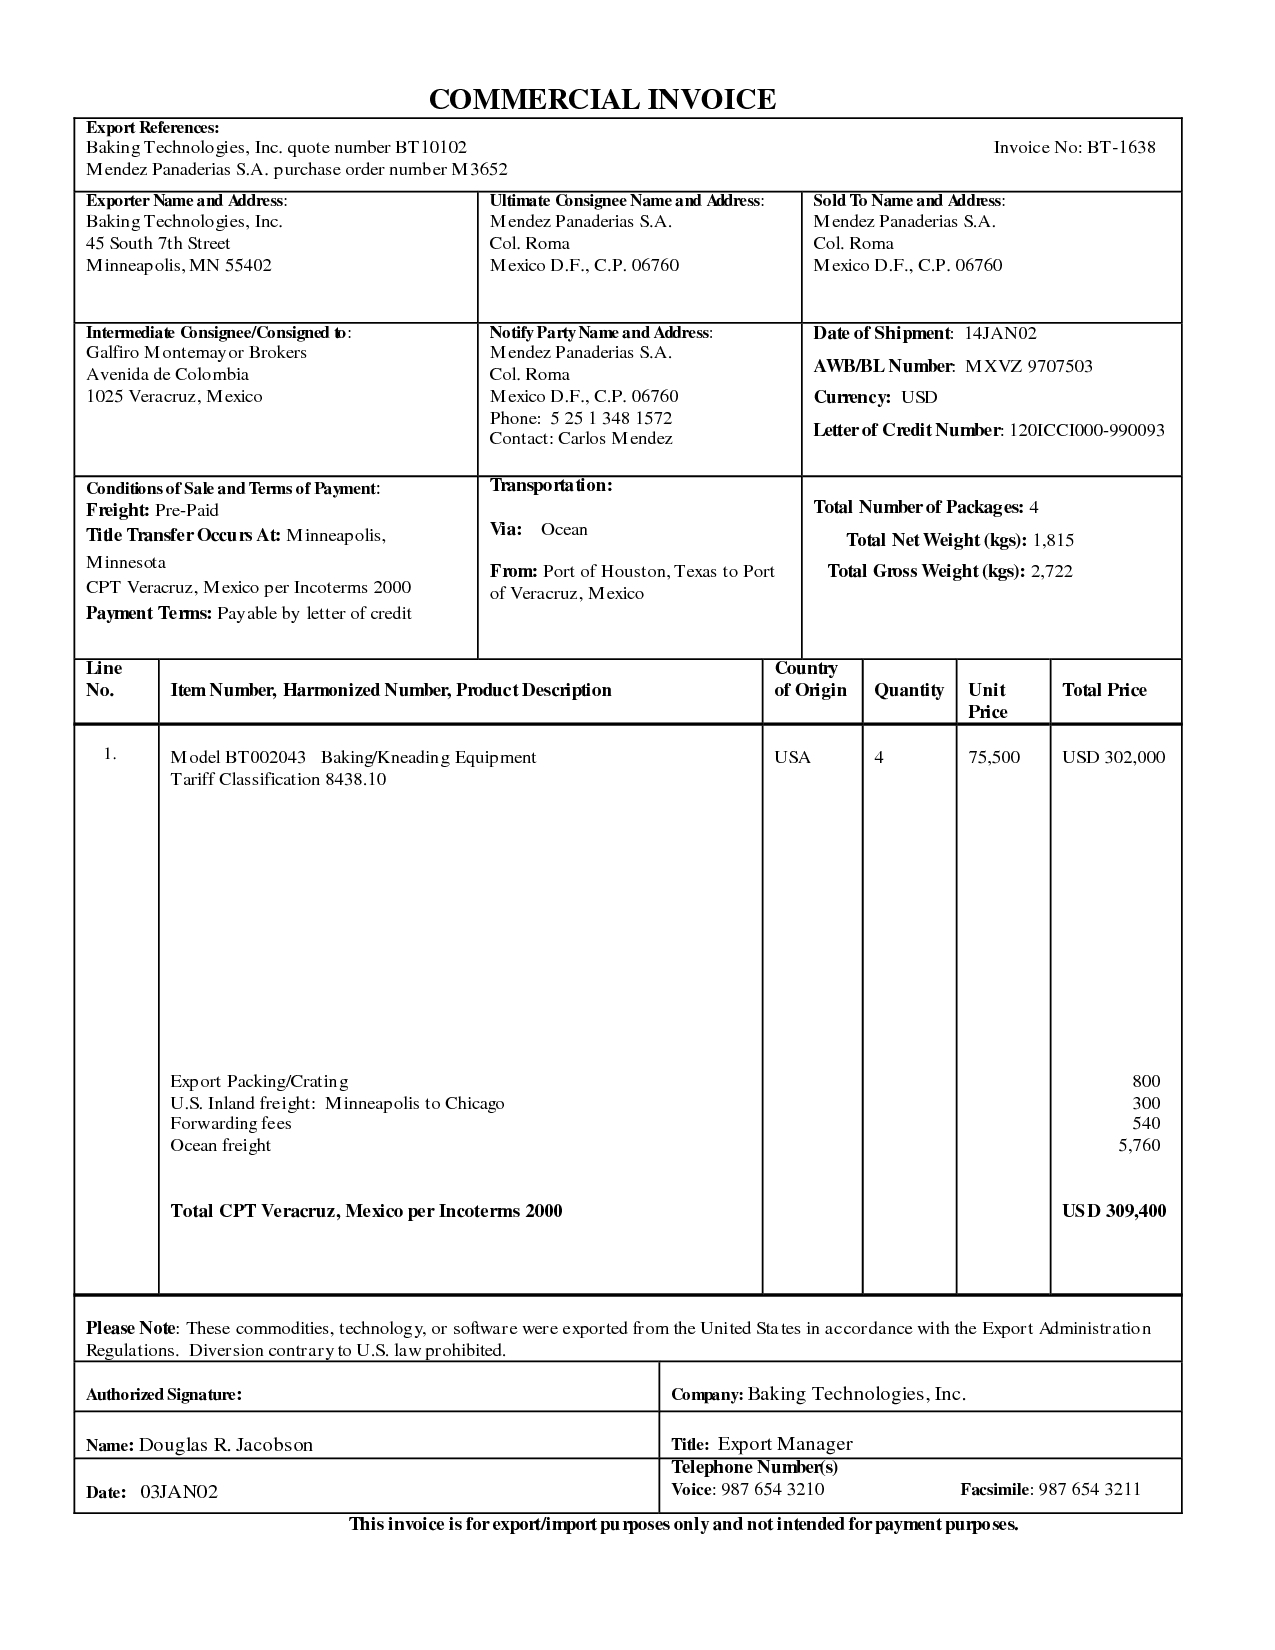 commercial invoice for export export invoice template 11 commercial invoice templates download 1275 X 1650